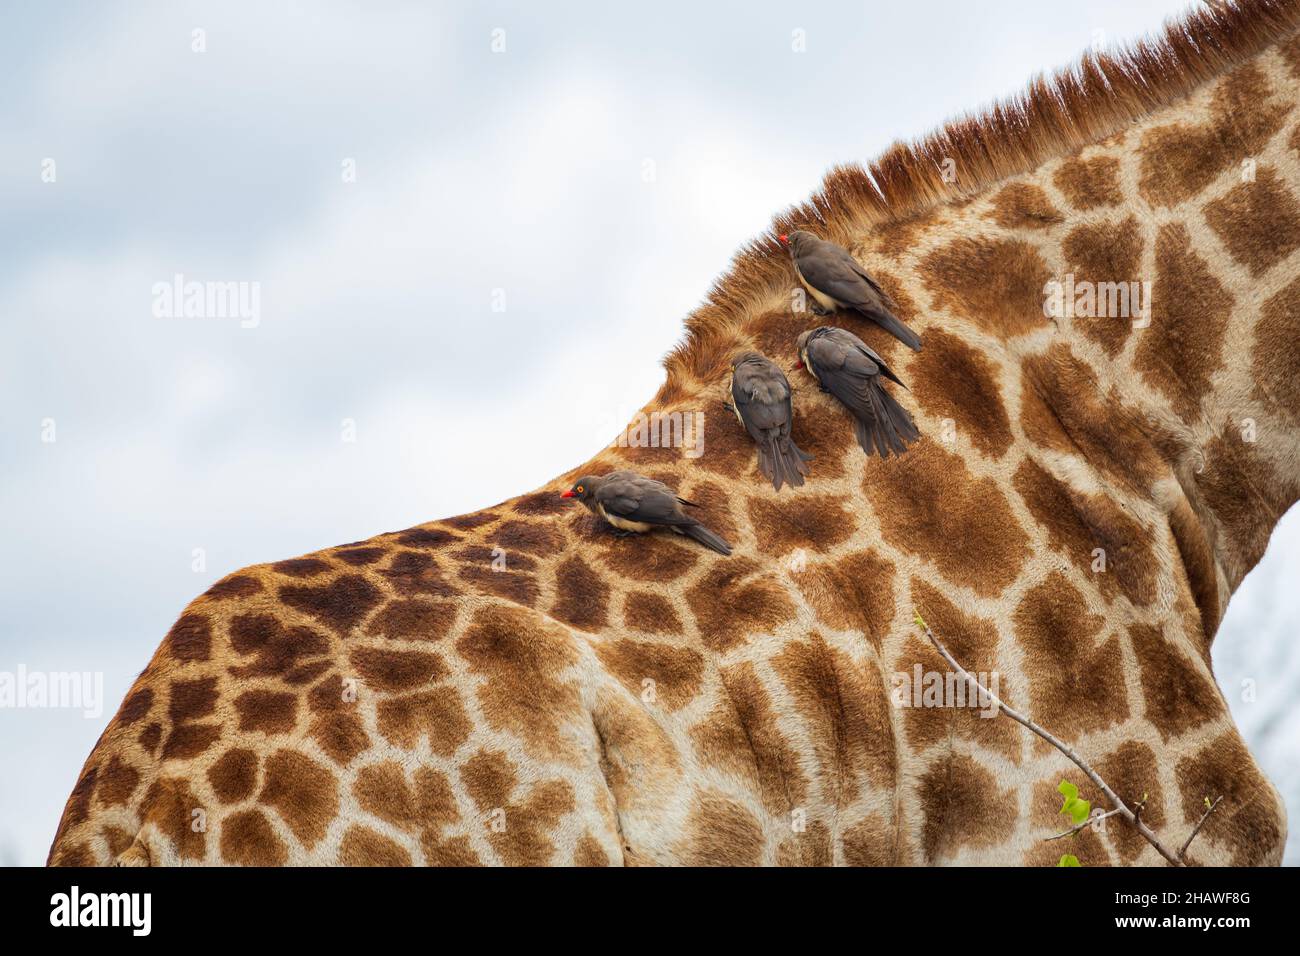 Red-billed oxpeckers Buphagus erythrorynchus on back of a giraffe, Kruger National Park, South Africa Stock Photo